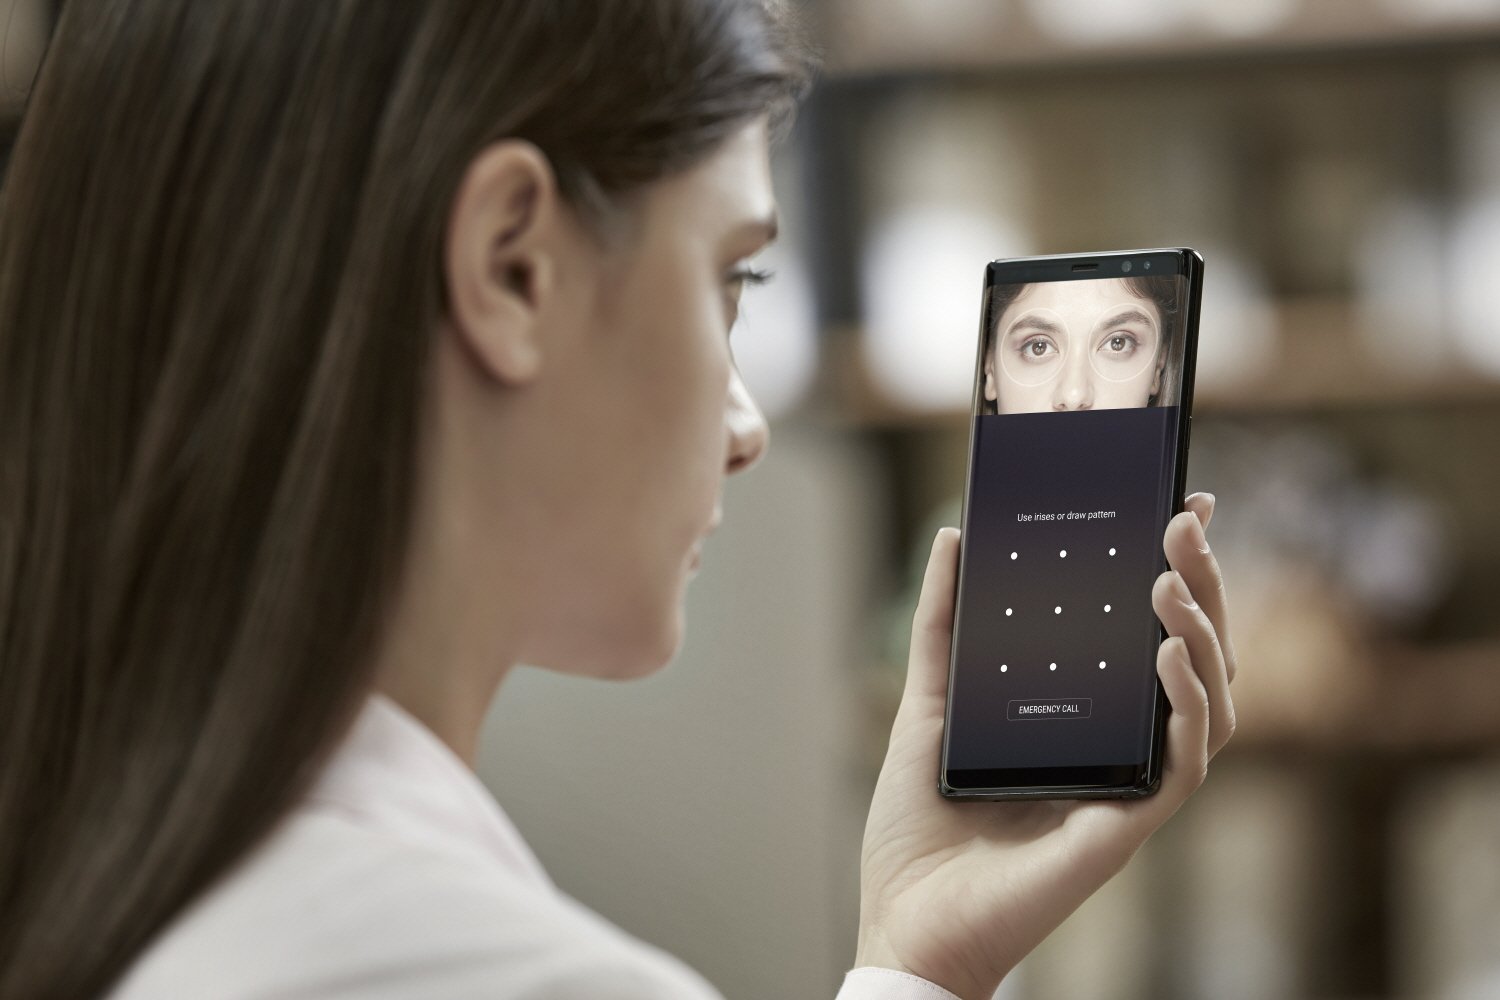 How To Set Up Iris Scanning On Galaxy Note 8